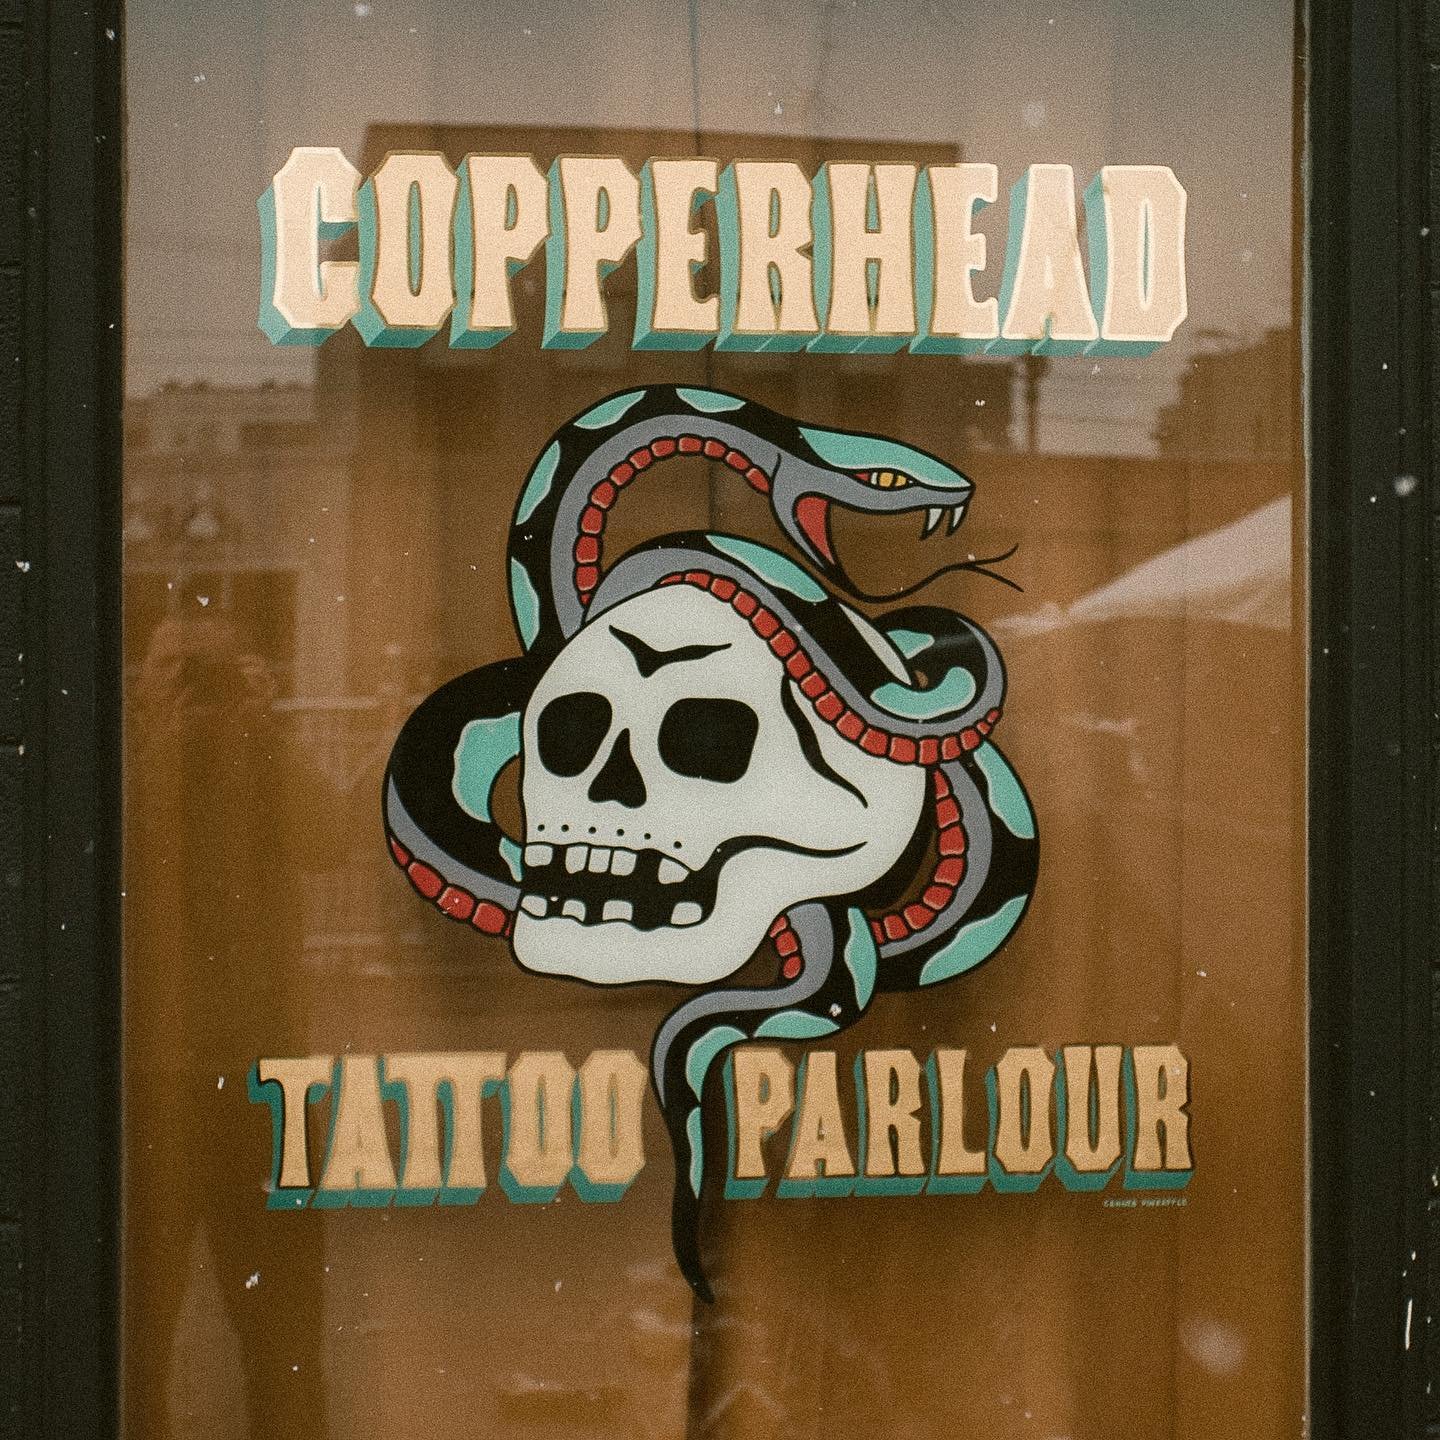 🐍 a kid rockin &amp; malort good time ty @copperheadtattooparlor 🐍